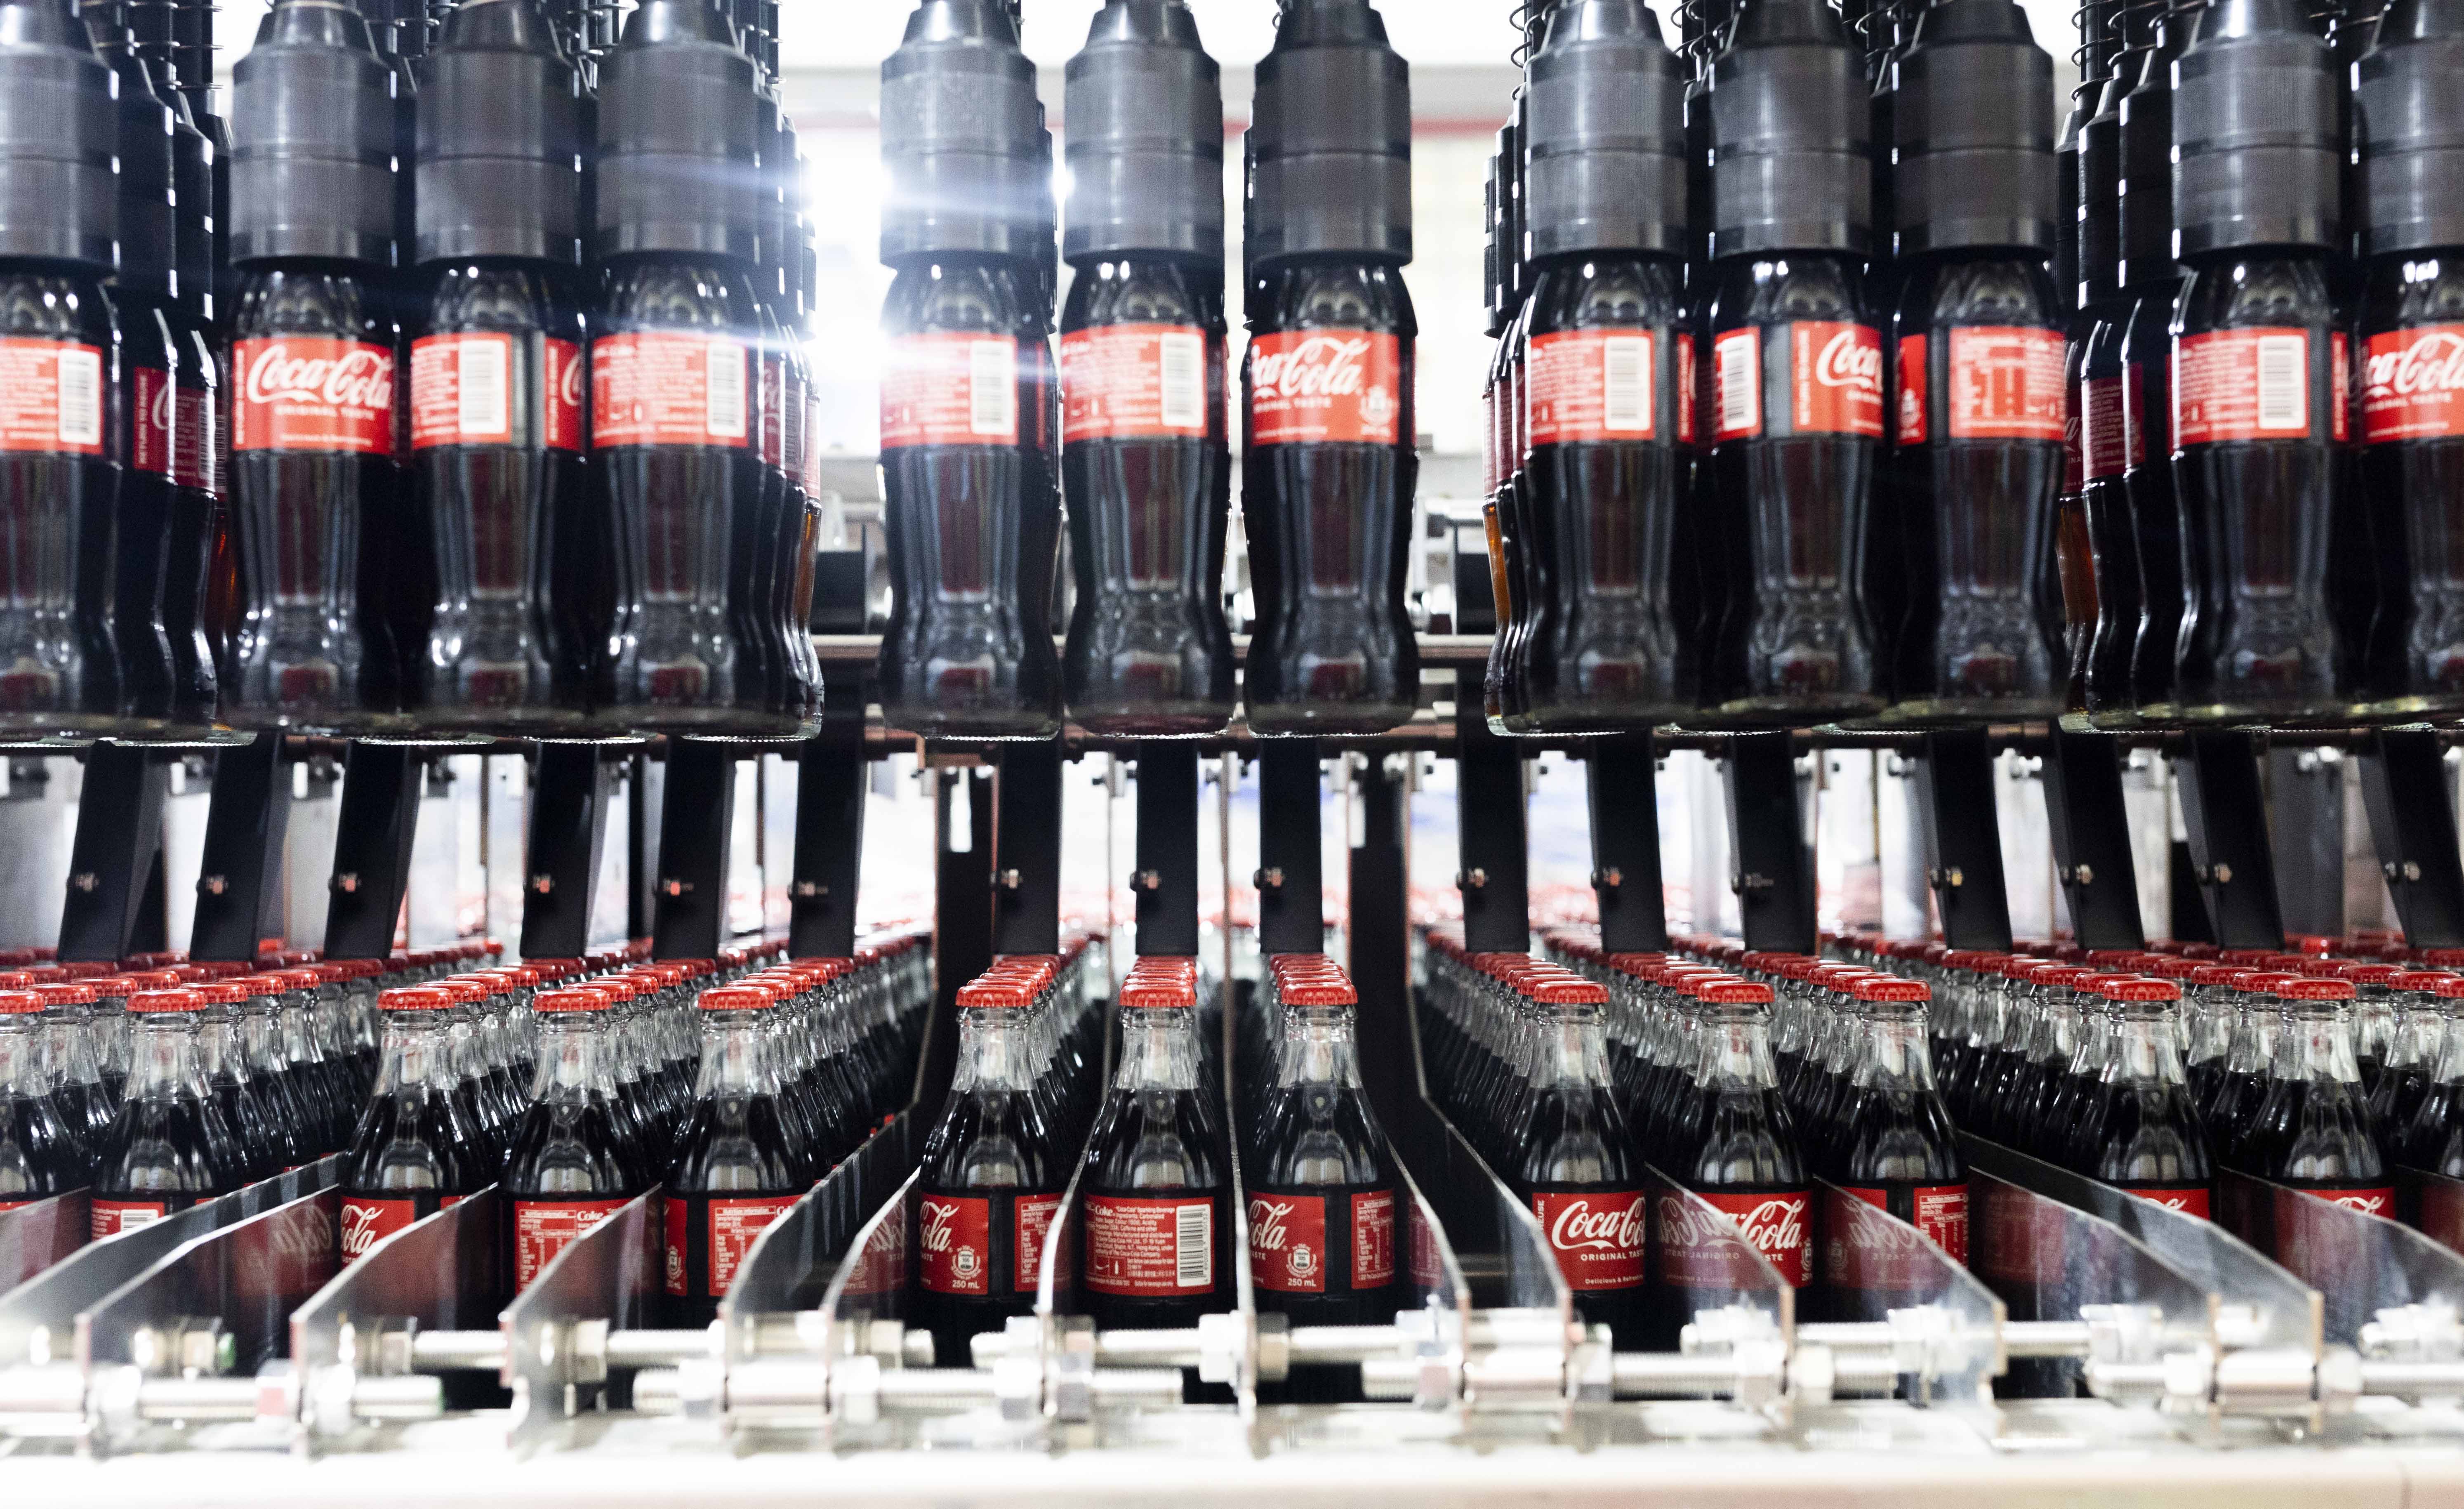 Coca-Cola turns to refillable glass bottles in fight against inflation